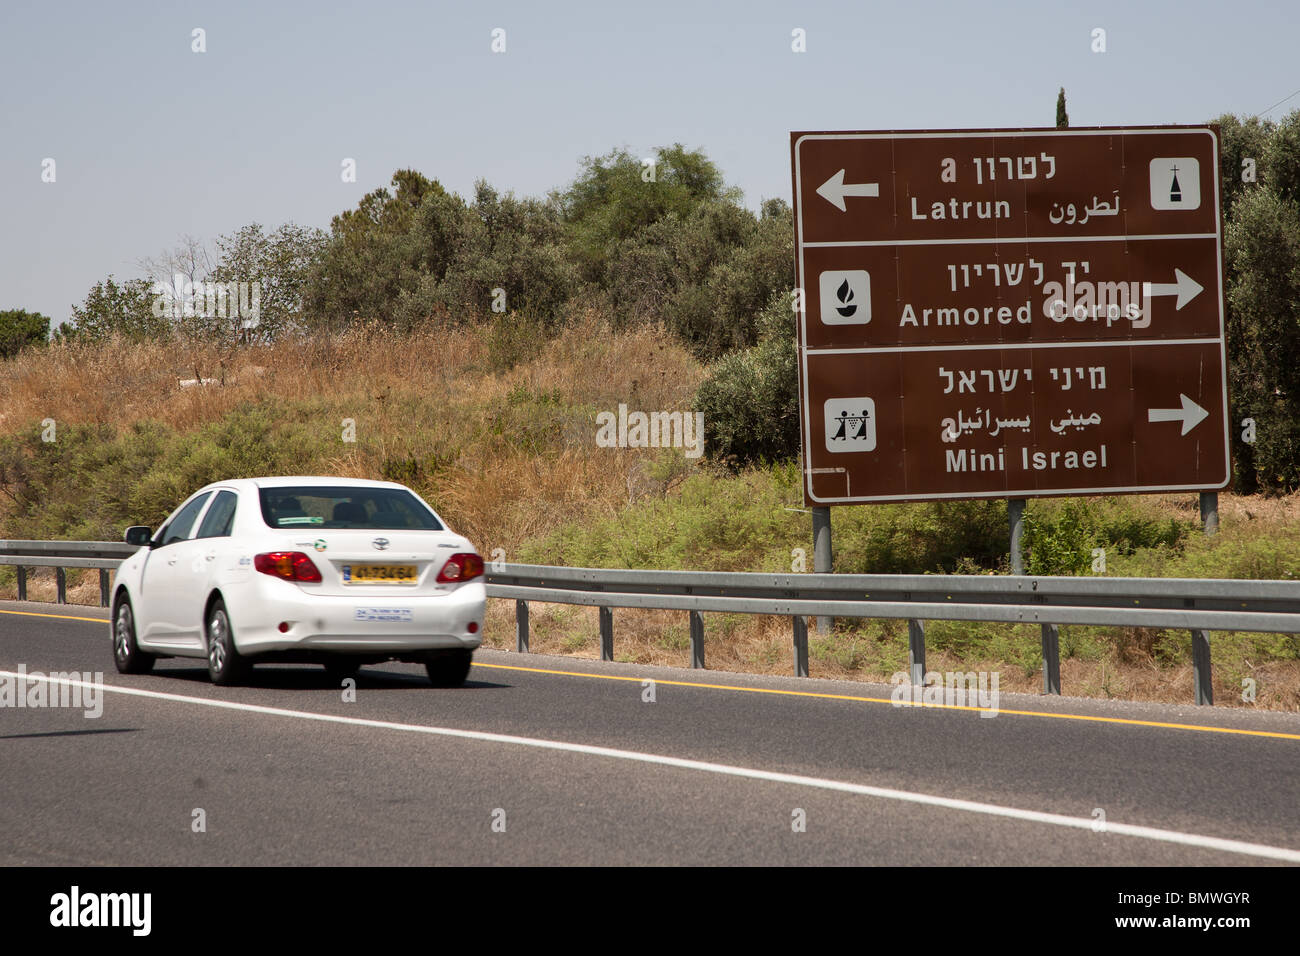 Roadside direction sign on Road 3 Near Latrun Junction to Armored Corp Museum, Mini Israel and Latrun Monastery Stock Photo